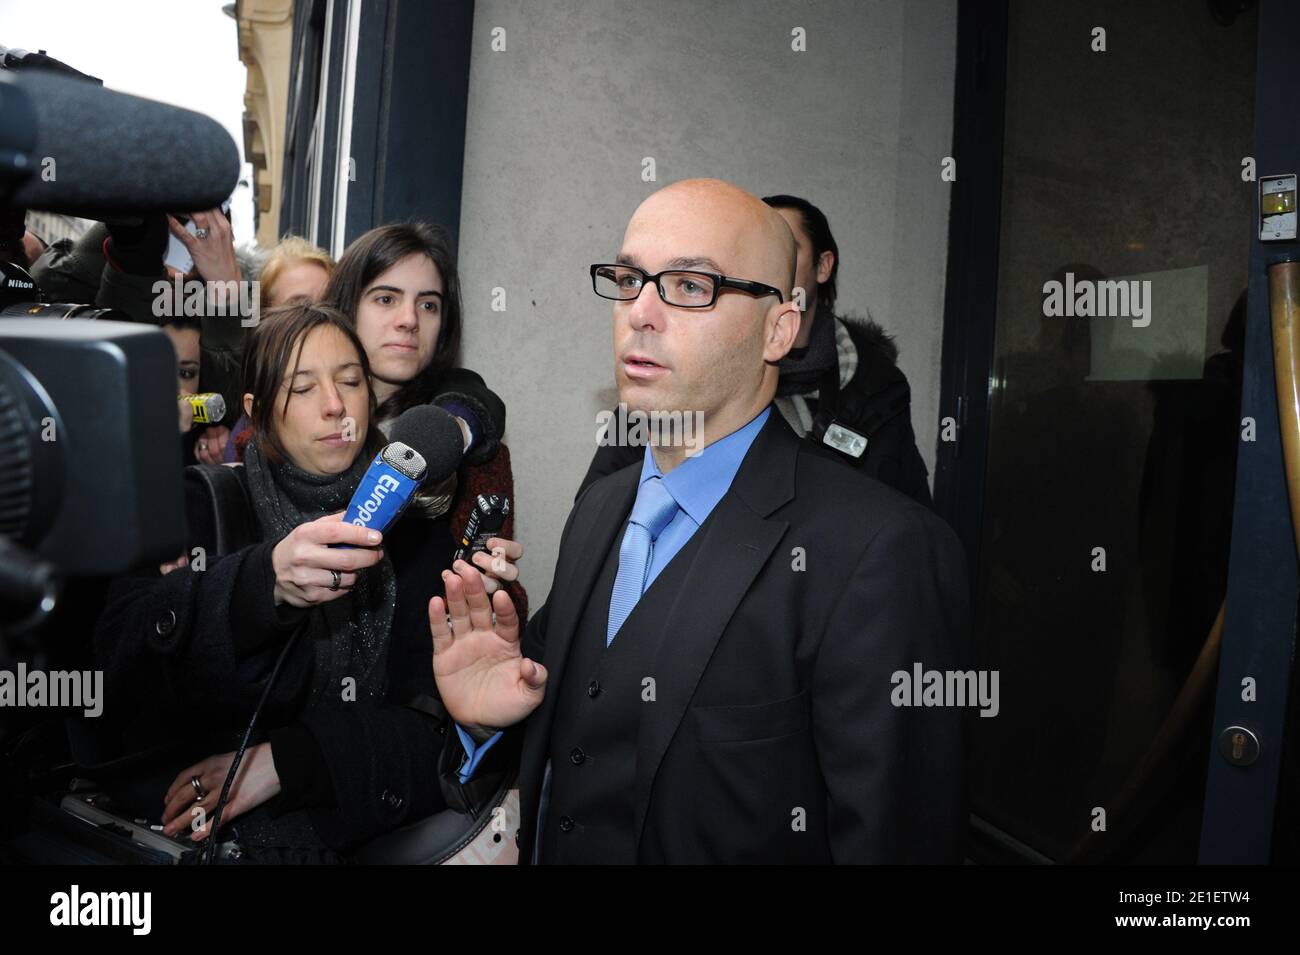 John Galliano's lawyer Stephane Zerbib speaks to the press in front of the 3rd arrondissement precinct as British designer John Galliano should be confronted with a couple accusing him of anti-Semitic comments in Paris, France on February, 28, 2011. John Galliano, the chief designer at Christian Dior since 1996, has been suspended from his duties at the fashion house after he was arrested for allegedly assaulting a woman and making anti-Semitic remarks at an outdoor Paris cafe 'La Perle'. Photo by ABACAPRESS.COM Stock Photo